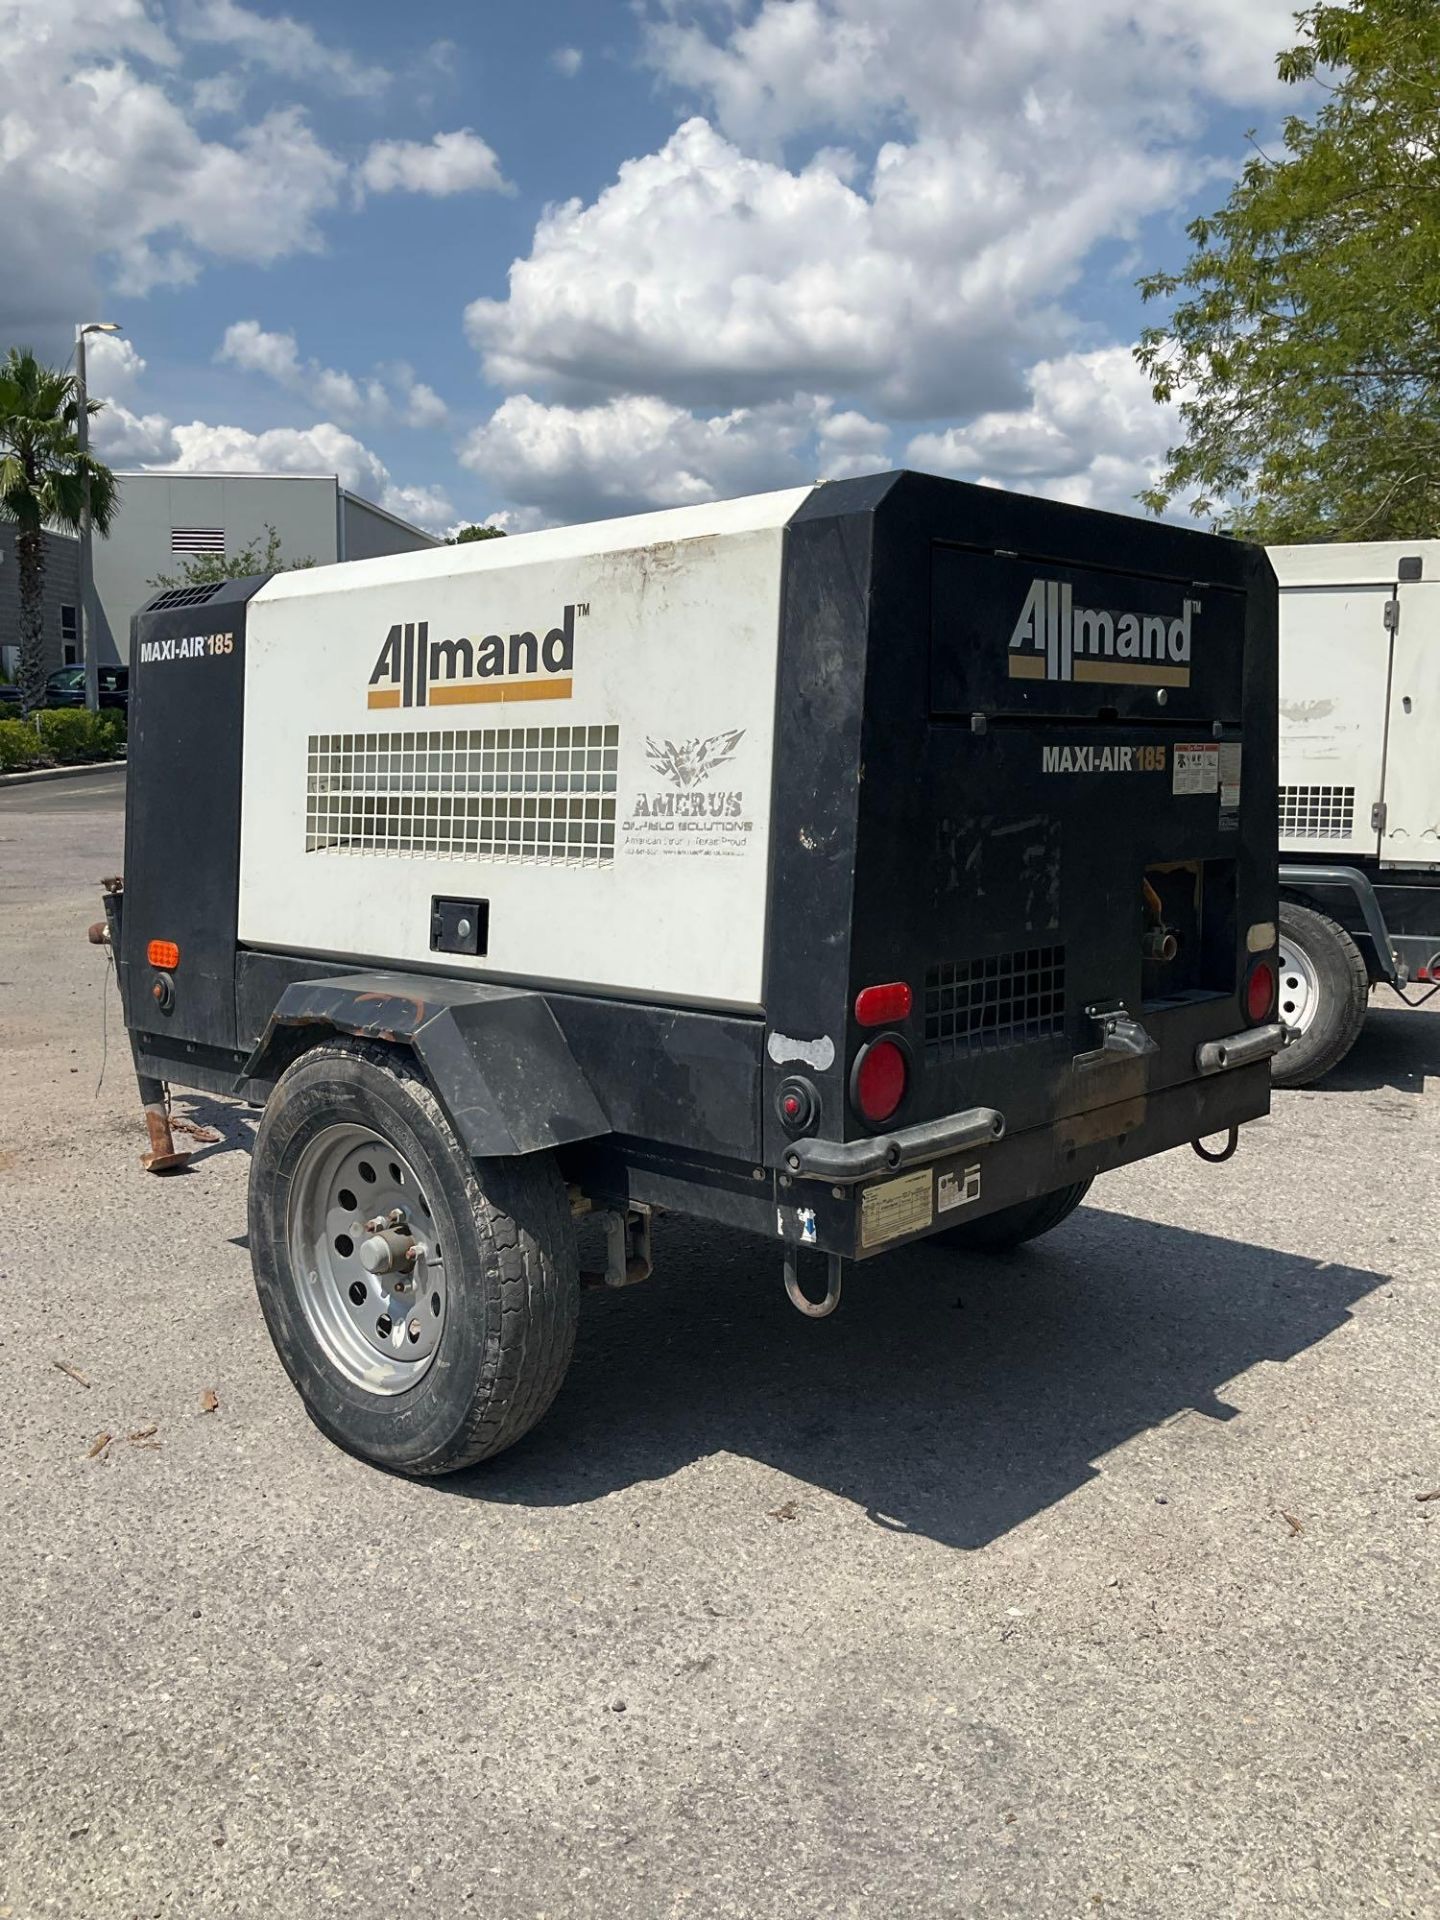 2018/2019 ALLMAND MAXI-POWER MA185-6E1 COMPRESSOR, DIESEL, TRAILER MOUNTED, NORMAL OPERATING - Image 4 of 14